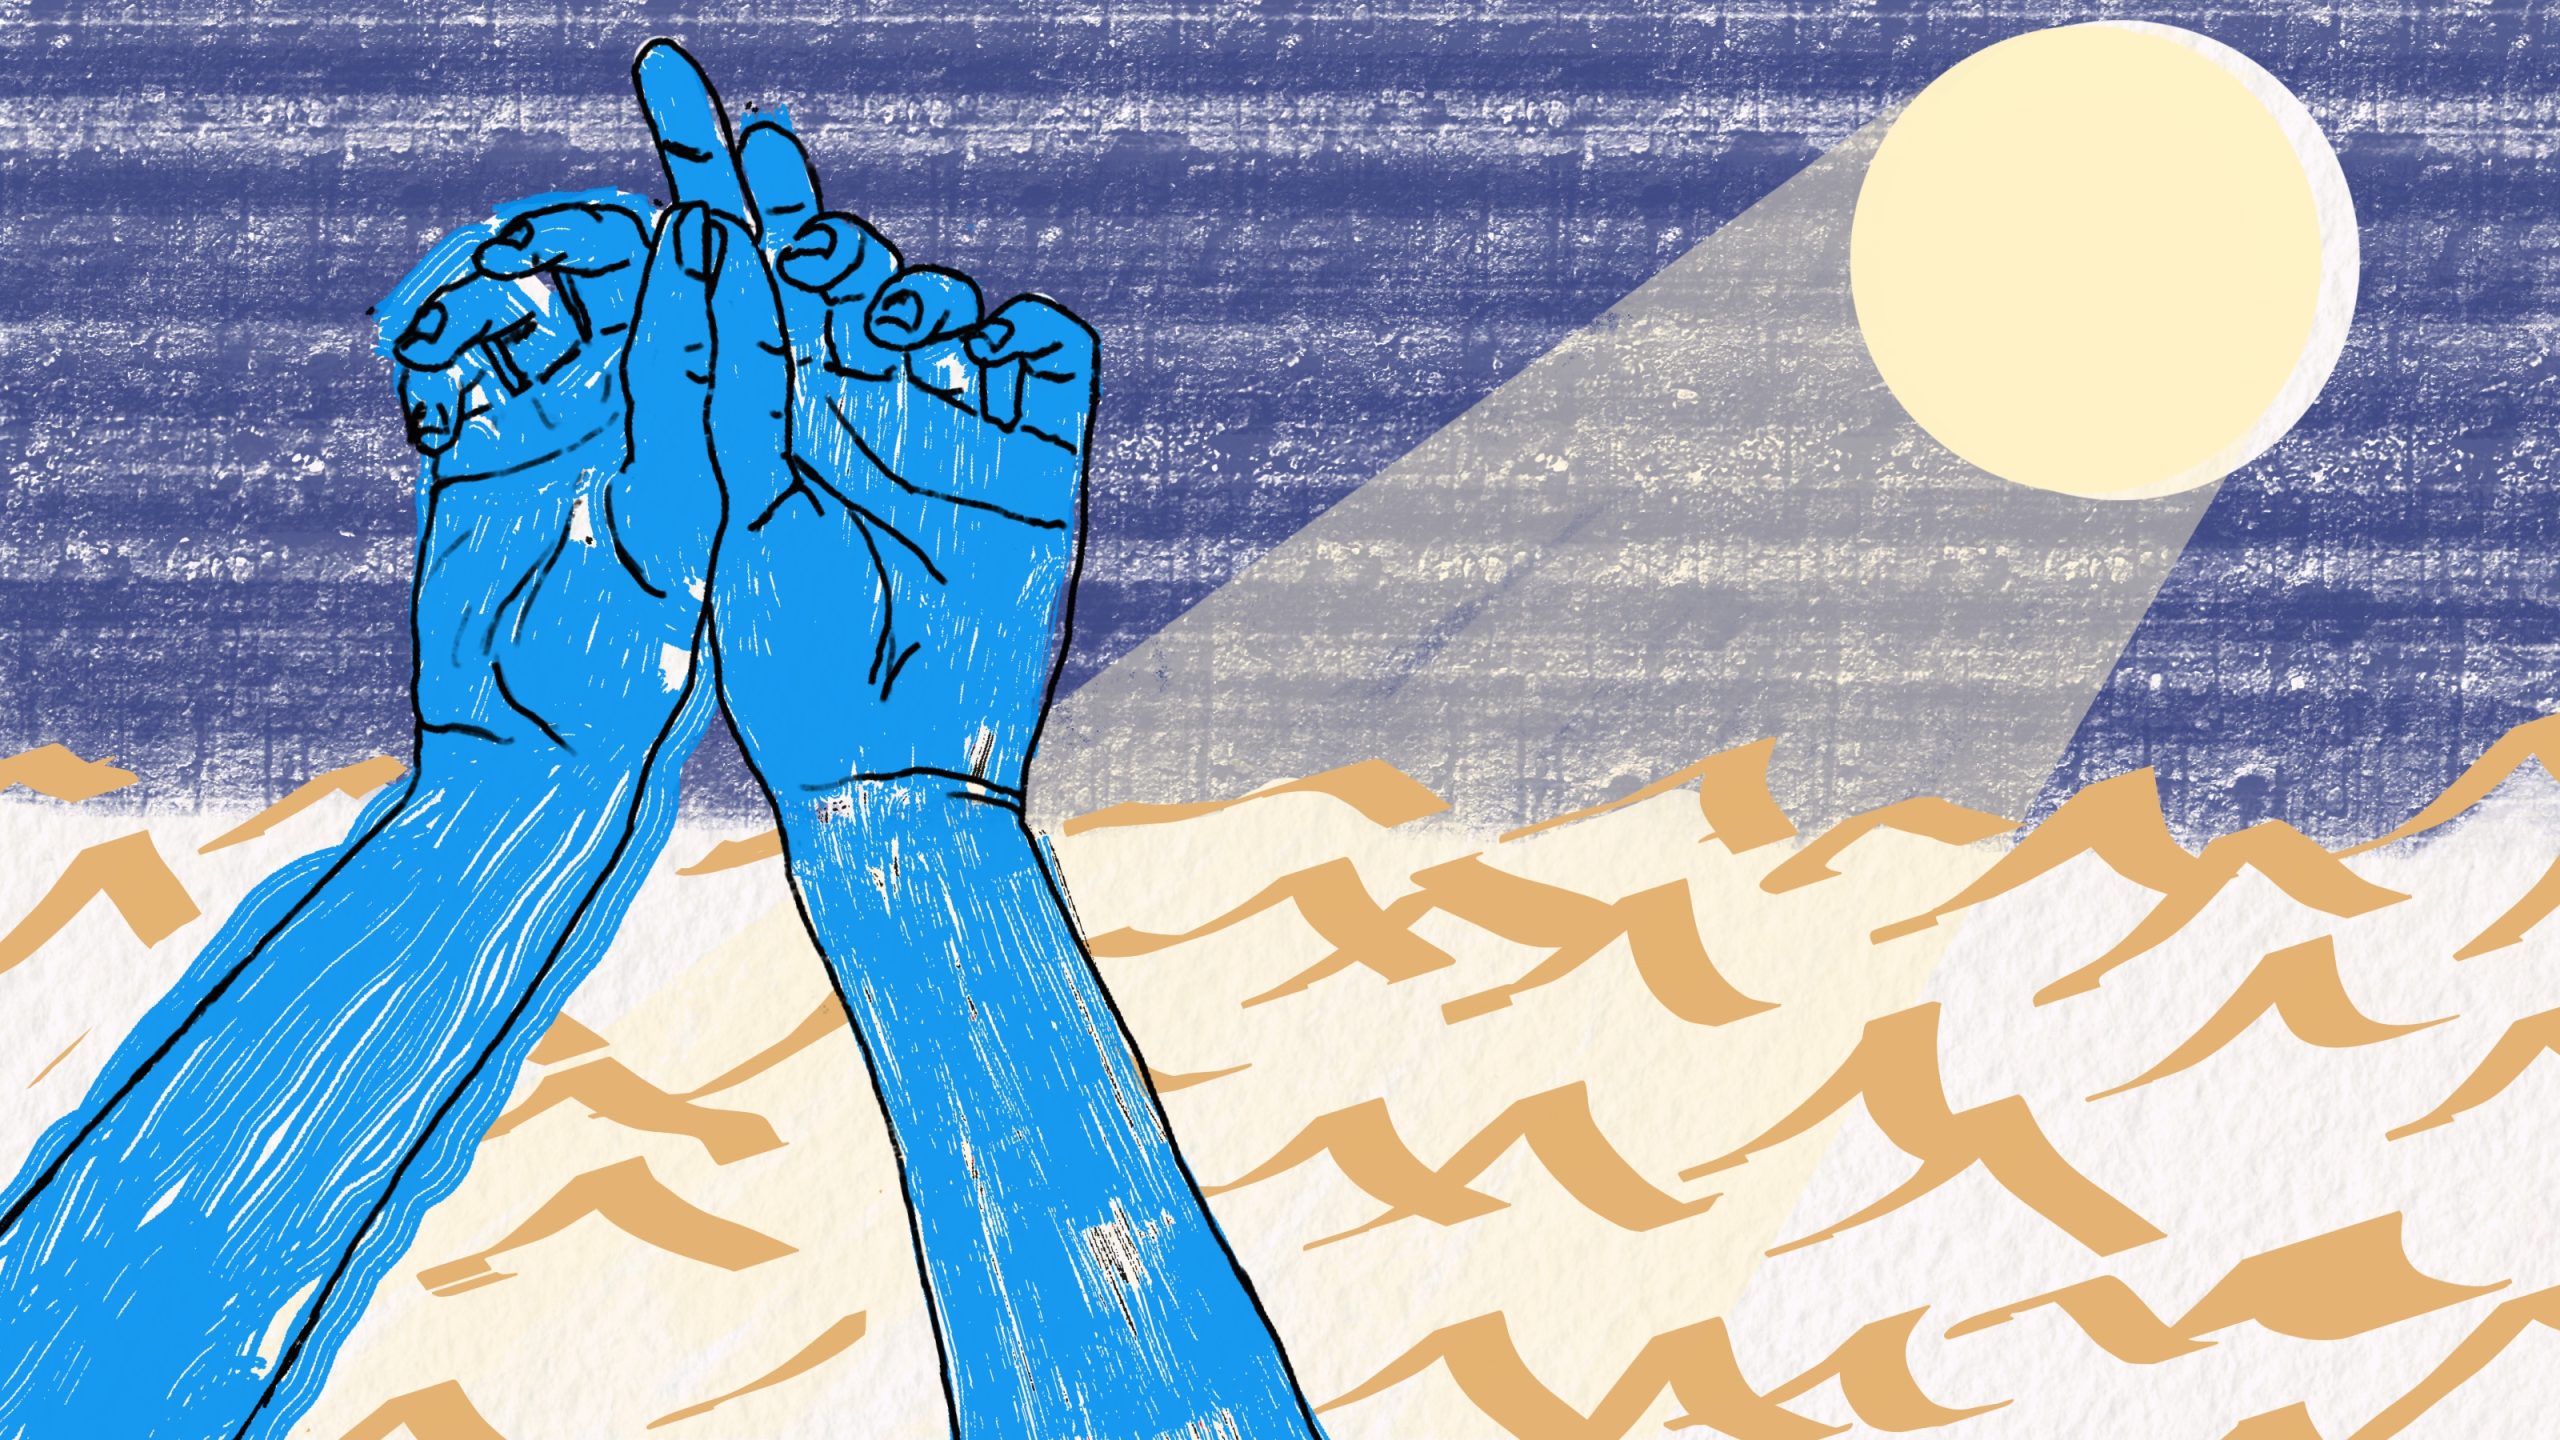 Image: An illustration of two blue-colored hands drawn up to the forearms which are reaching towards the sky, against light orange colored waves, a purple sunset sky, and a yellow sun beaming on the right side of the illustration. Illustration by Damiane Nickles.